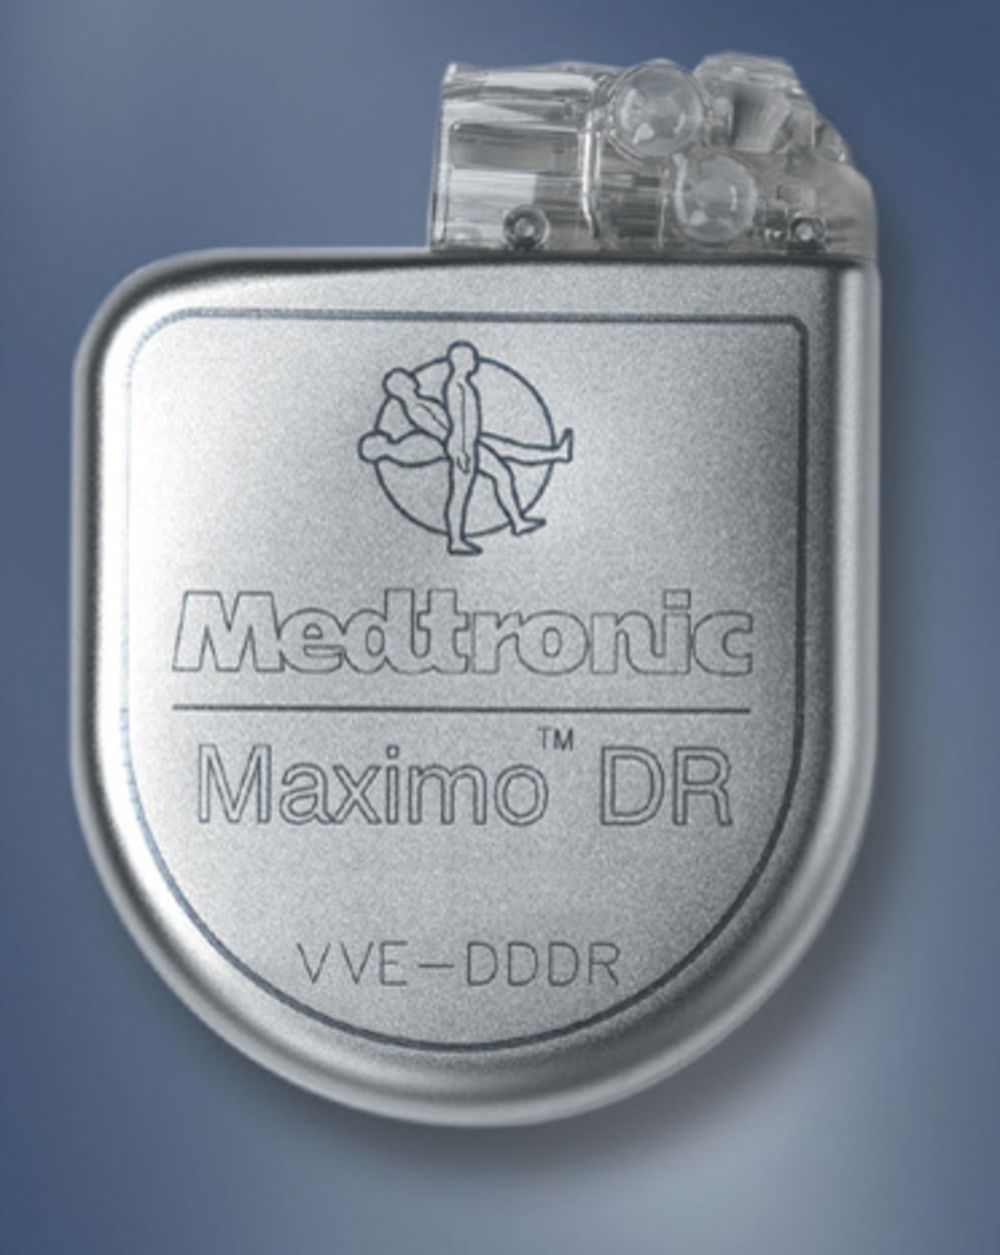  An ICD can deliver a shock to the heart. Modern ICDs can also function as pacemakers. The Medtronic Maximo was discovered vulnerable to cyberattacks. 